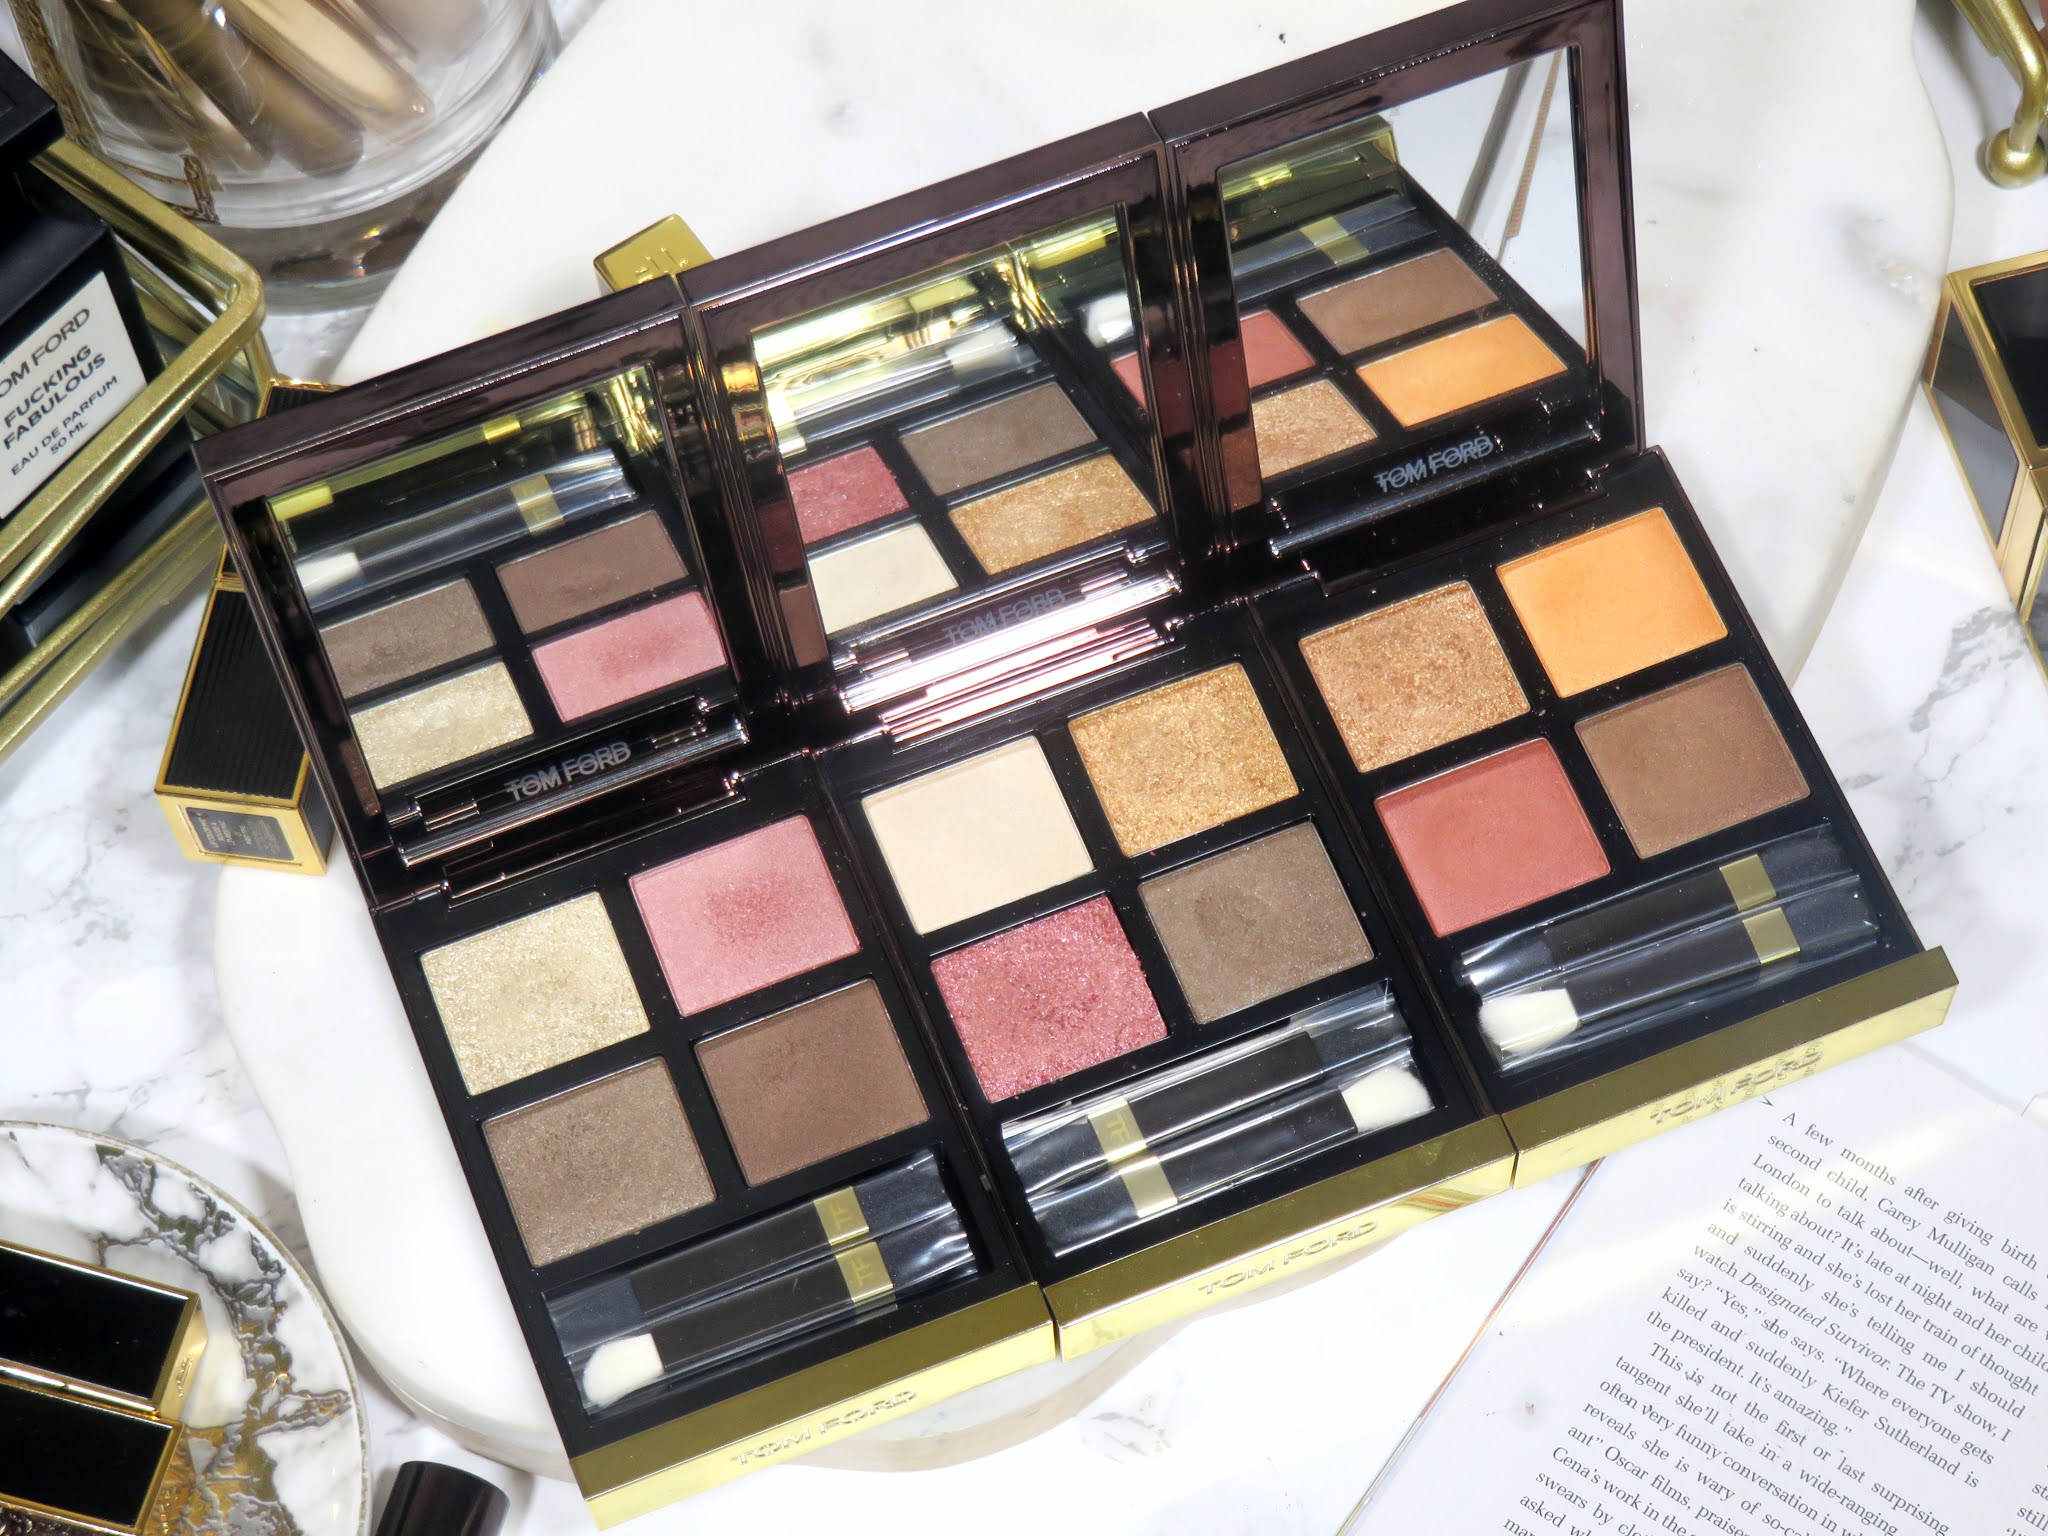 Tom Ford Visionaire Eye Color Quad Review and Swatches